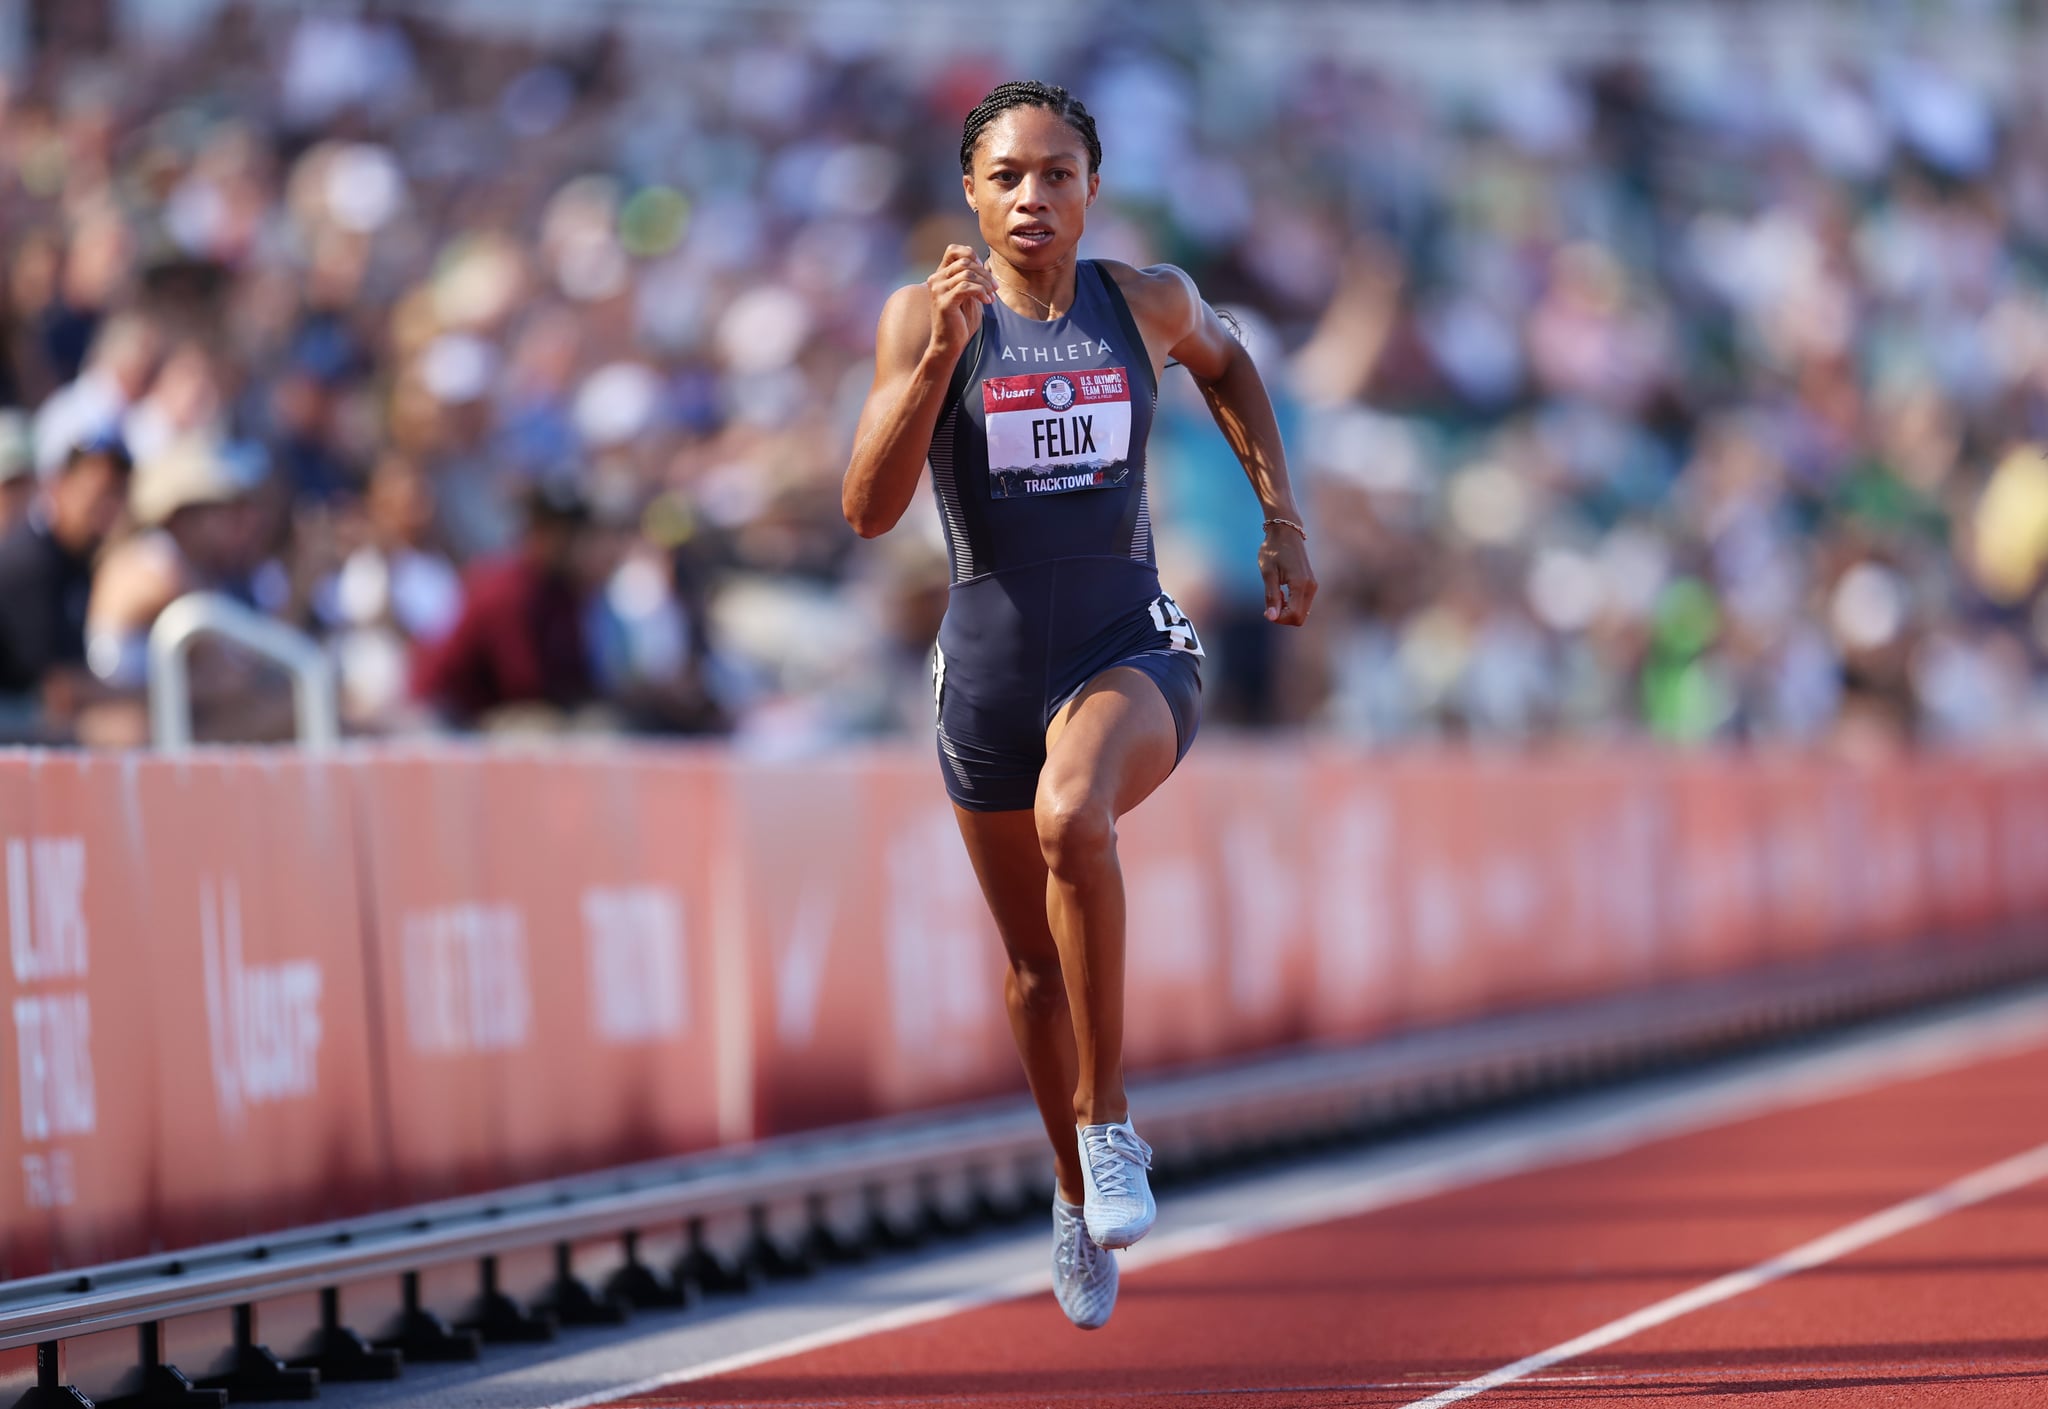 EUGENE, OREGON - JUNE 25: Allyson Felix competes in the Women' 200 Meters Semi-Finals during day eight of the 2020 U.S. Olympic Track & Field Team Trials at Hayward Field on June 25, 2021 in Eugene, Oregon. (Photo by Patrick Smith/Getty Images)